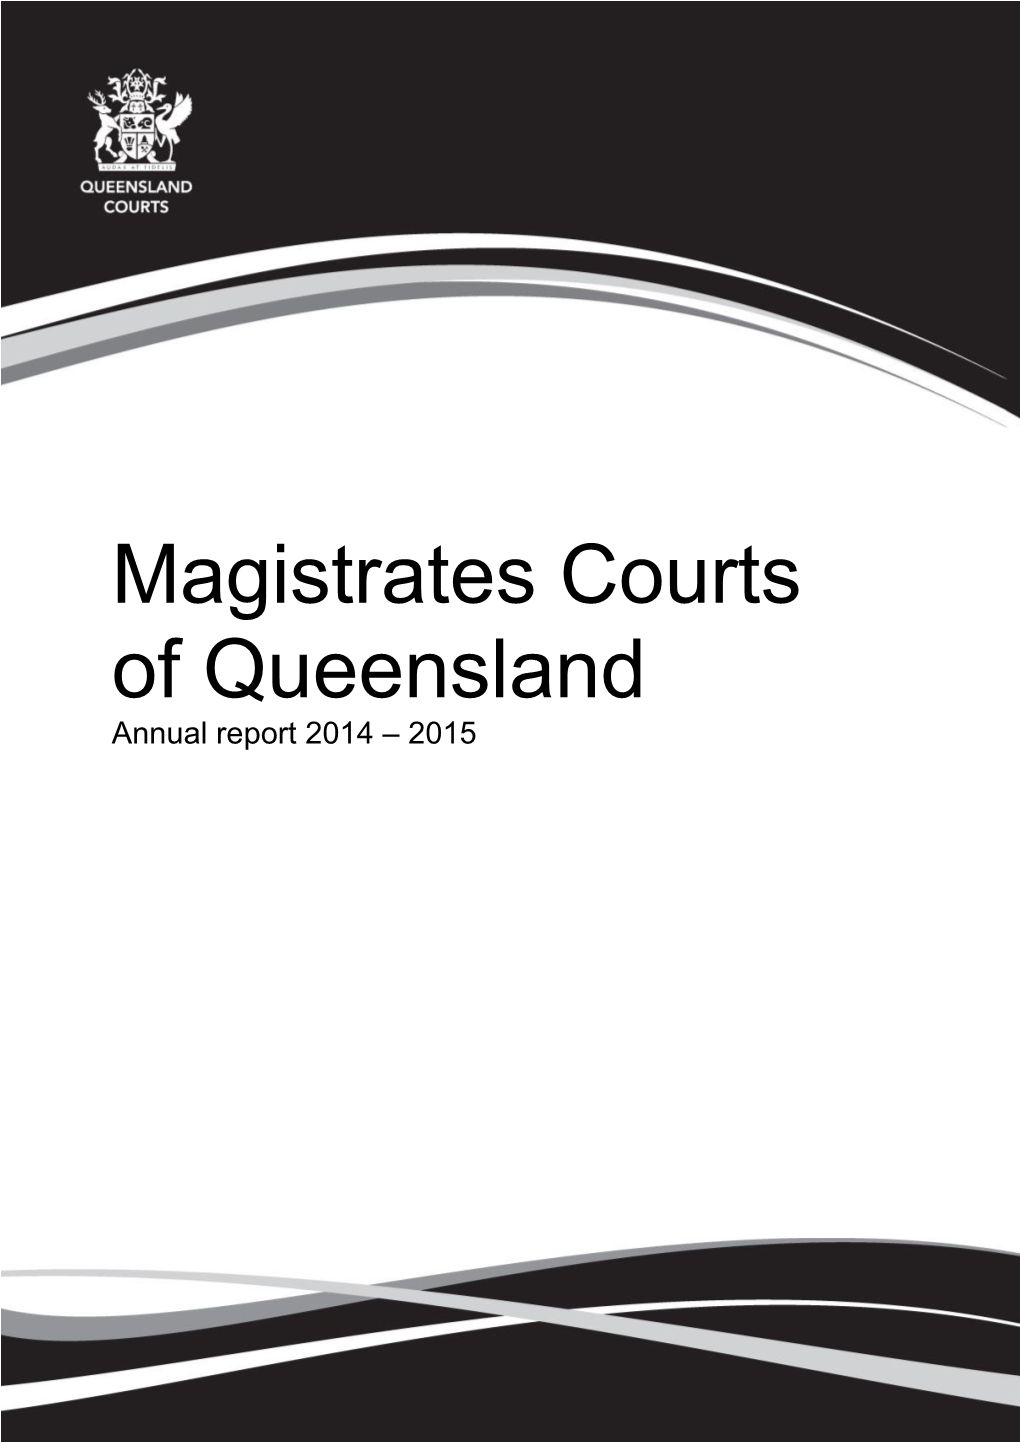 Magistrates Court of Queensland Annual Report for 2014-2015